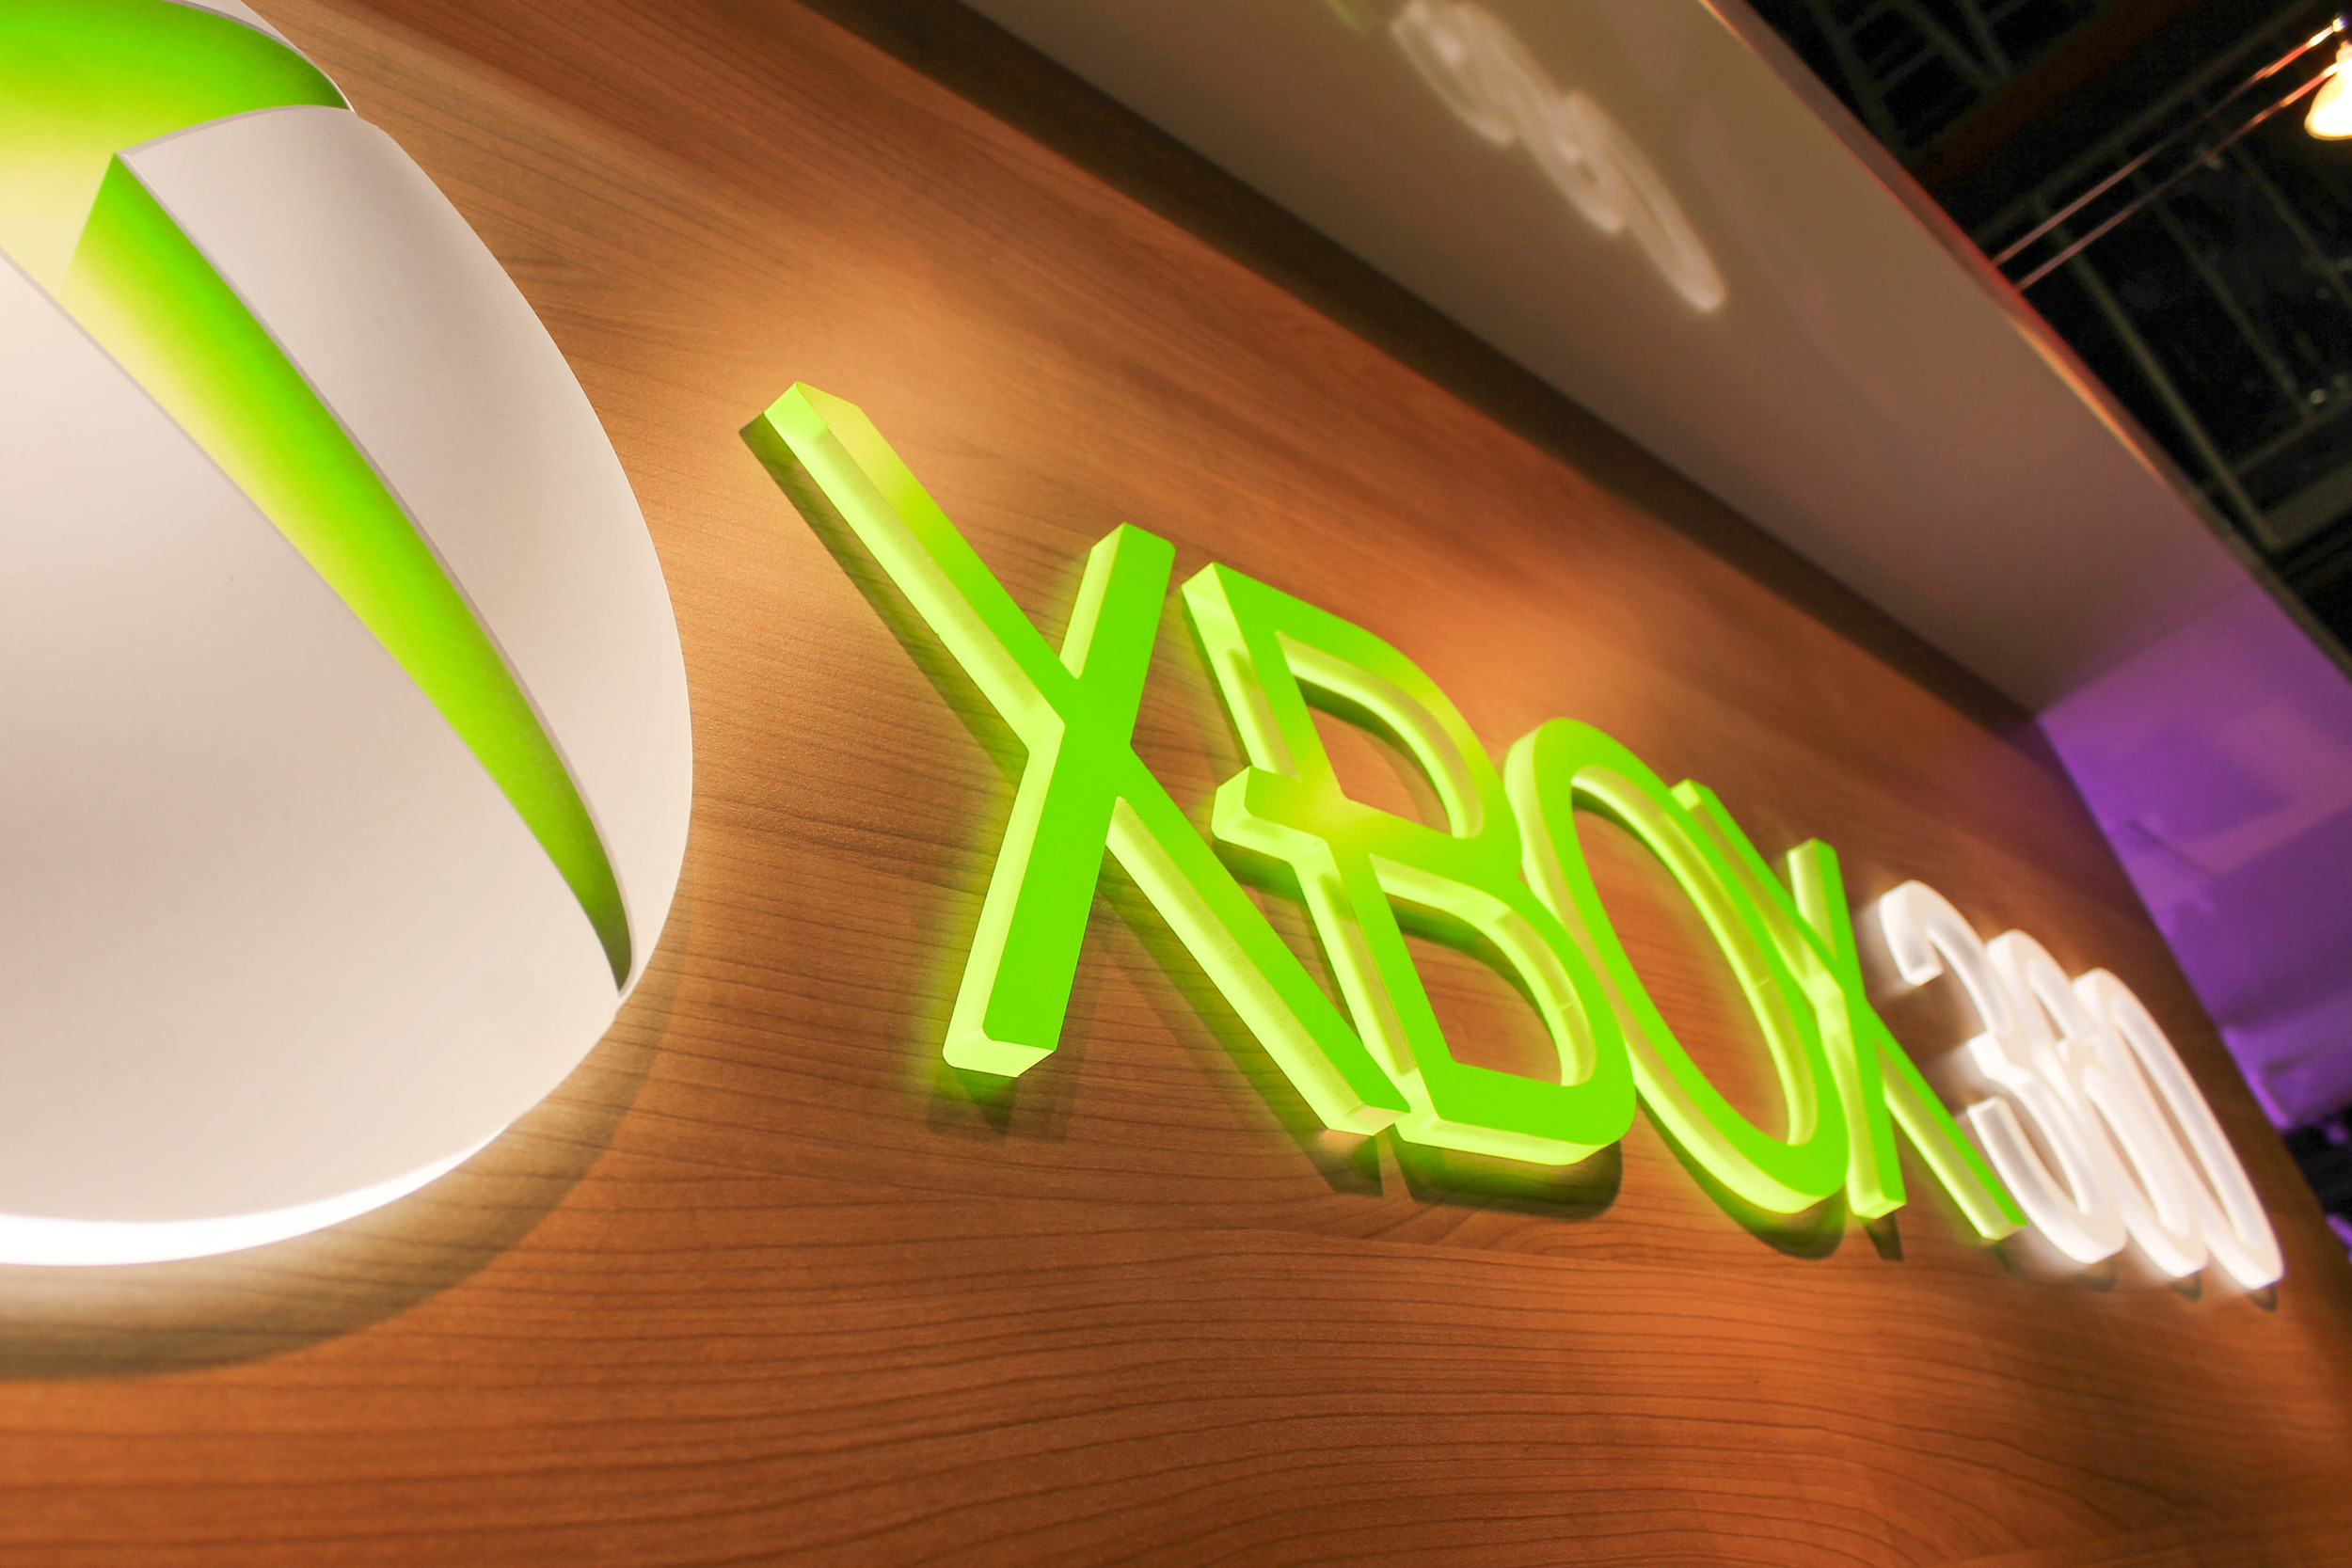 Branding of Xbox 360 dimensional logo with backlit LED